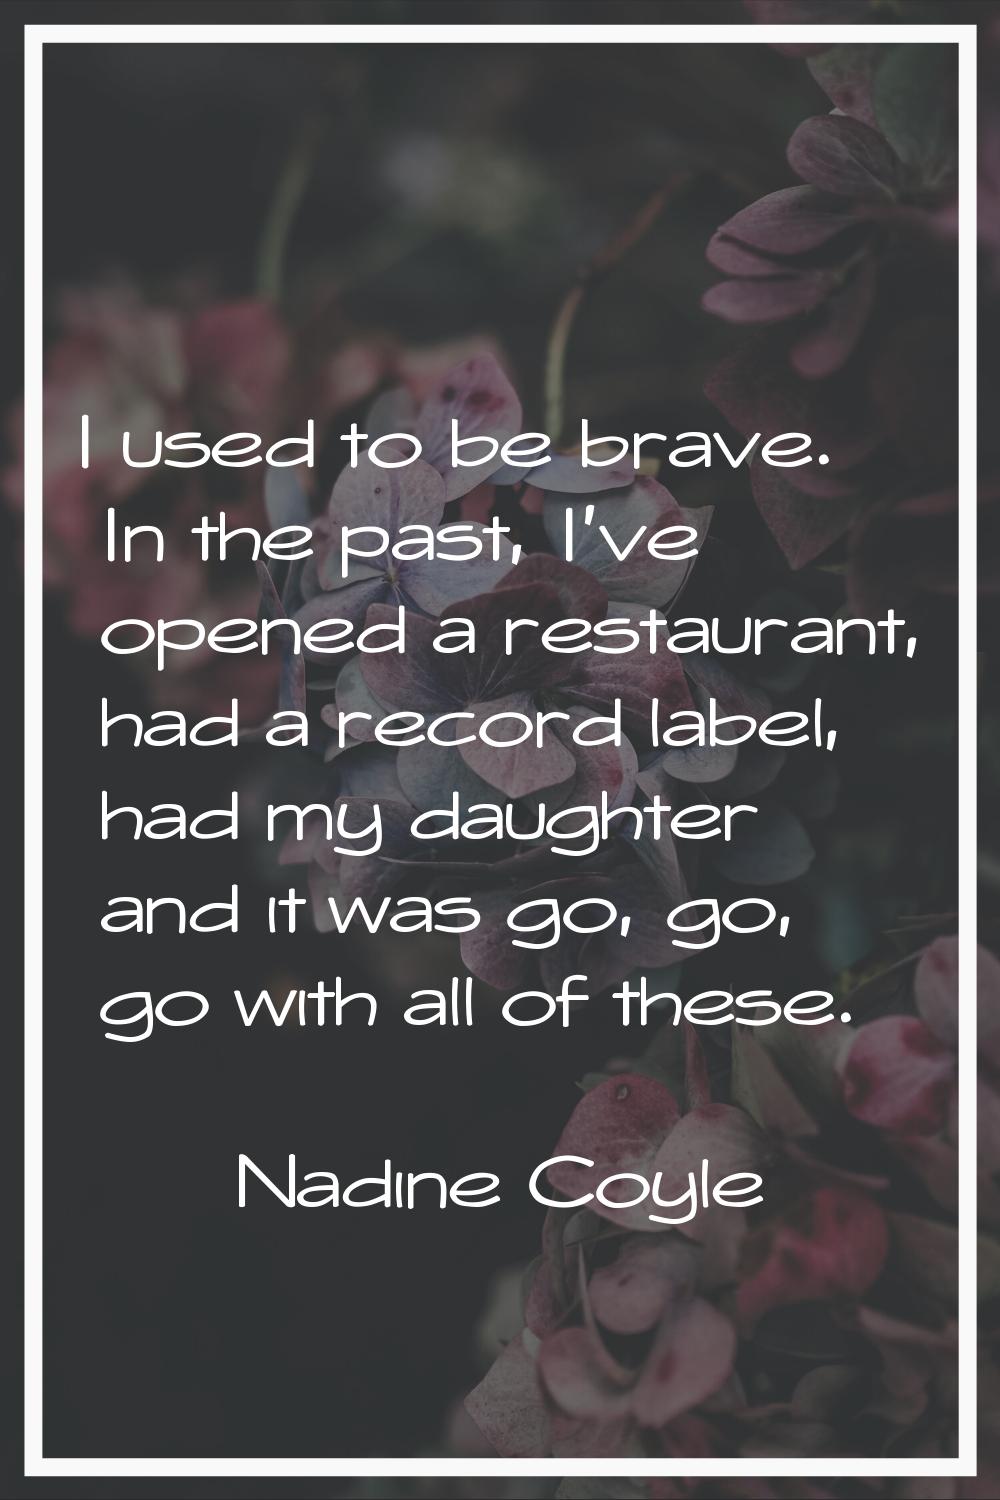 I used to be brave. In the past, I've opened a restaurant, had a record label, had my daughter and 